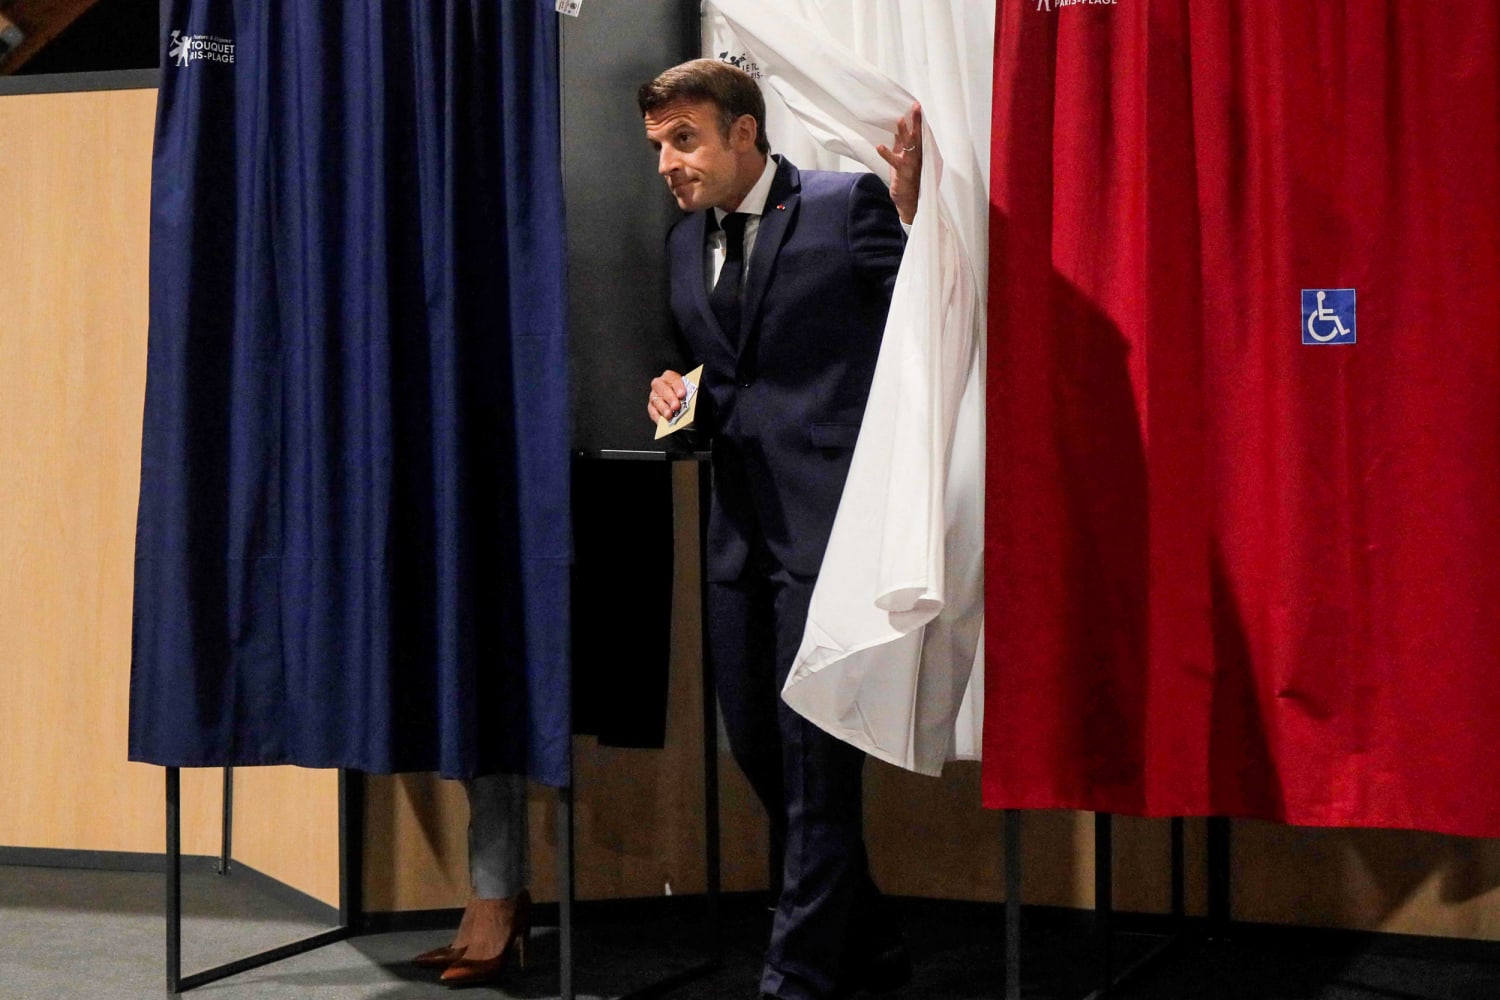 French leader Macron’s alliance projected to lose parliamentary majority